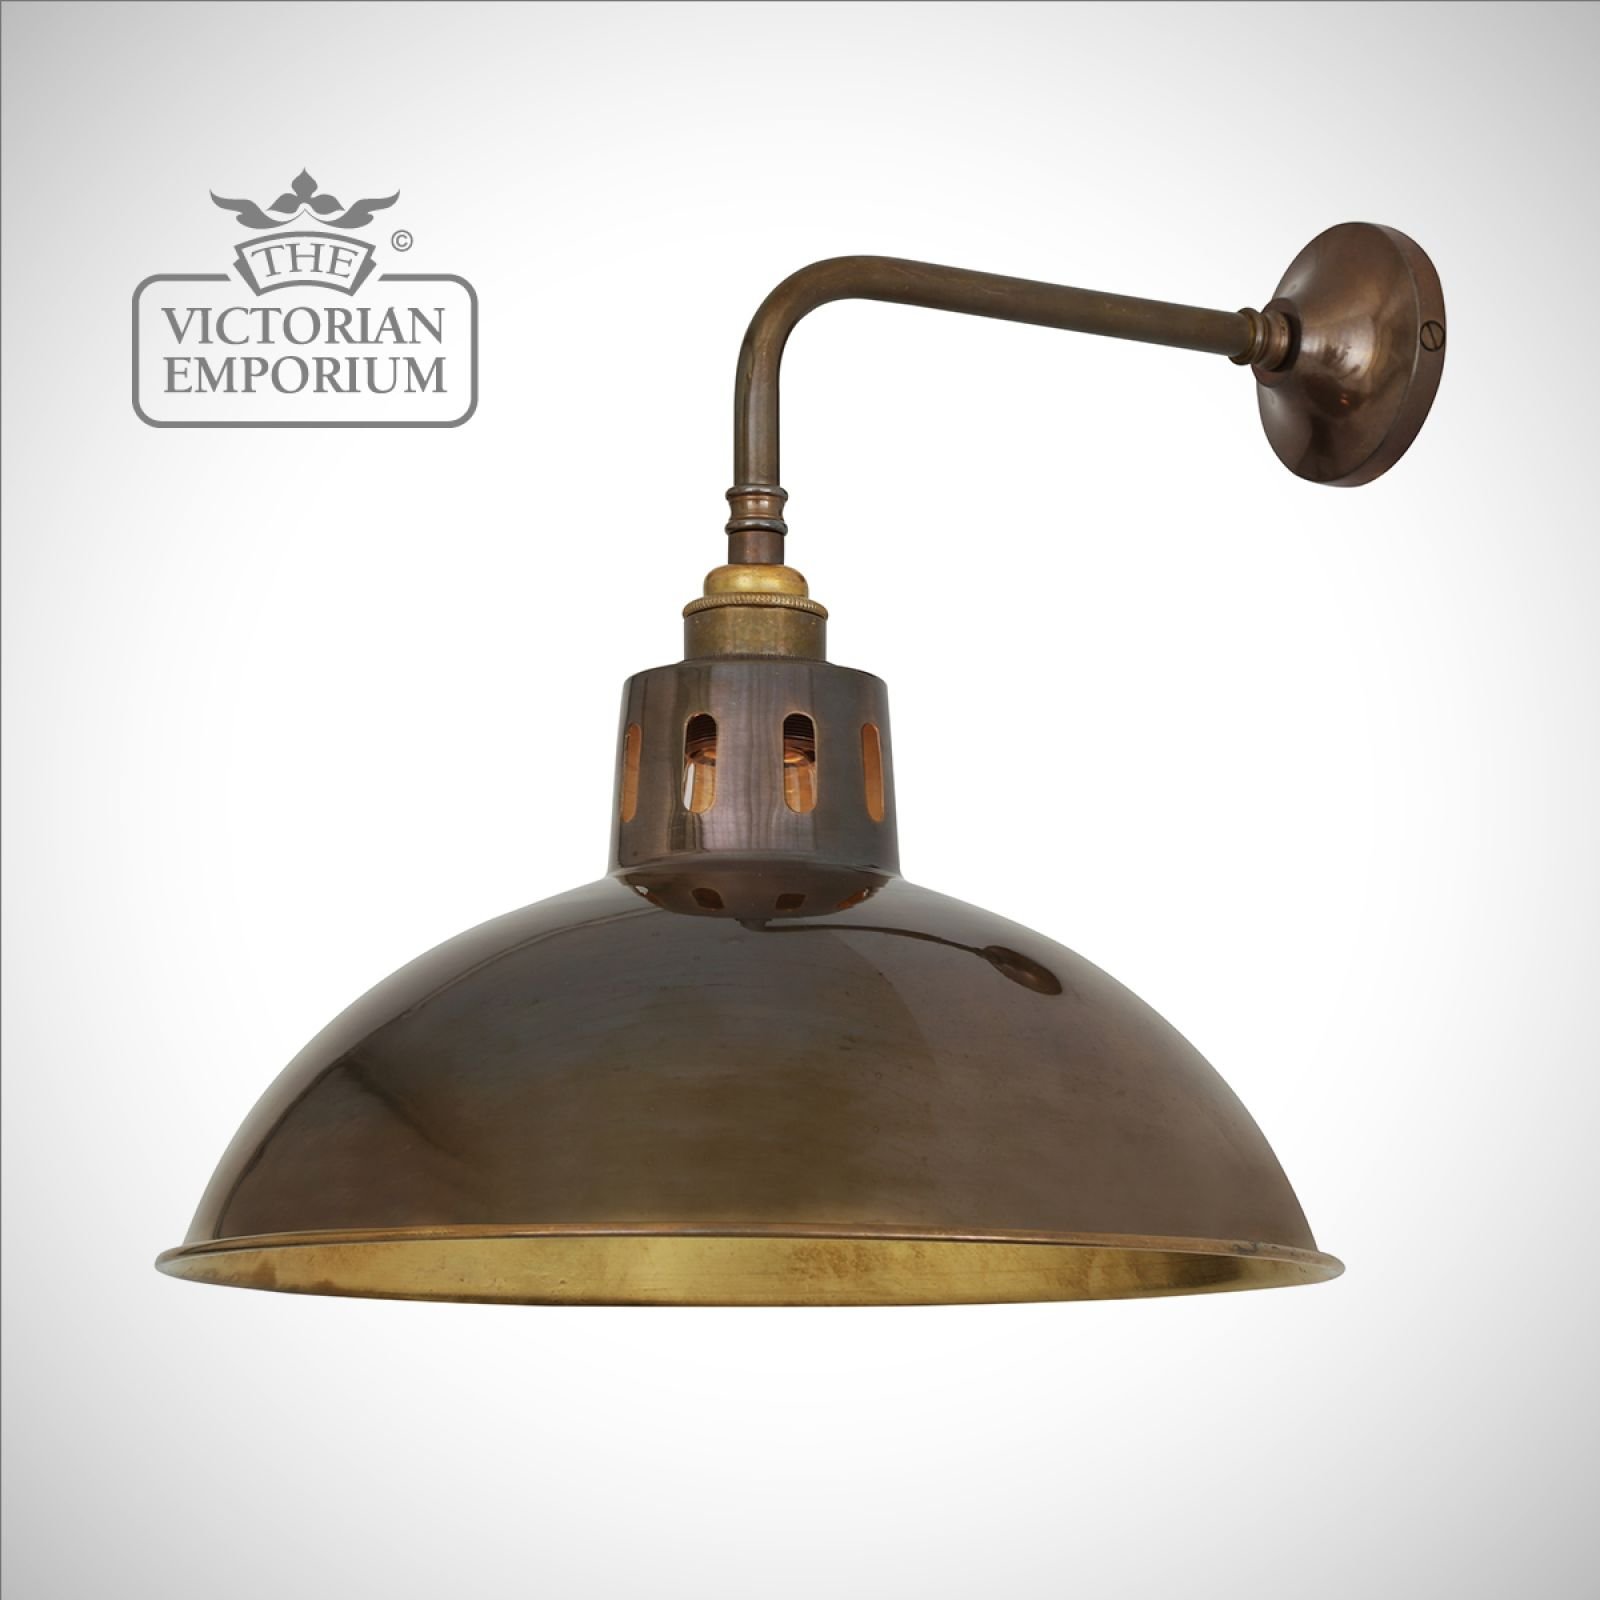 Paris Wall Light - Industrial Vintage-Style Dome-Shaped Brass Light